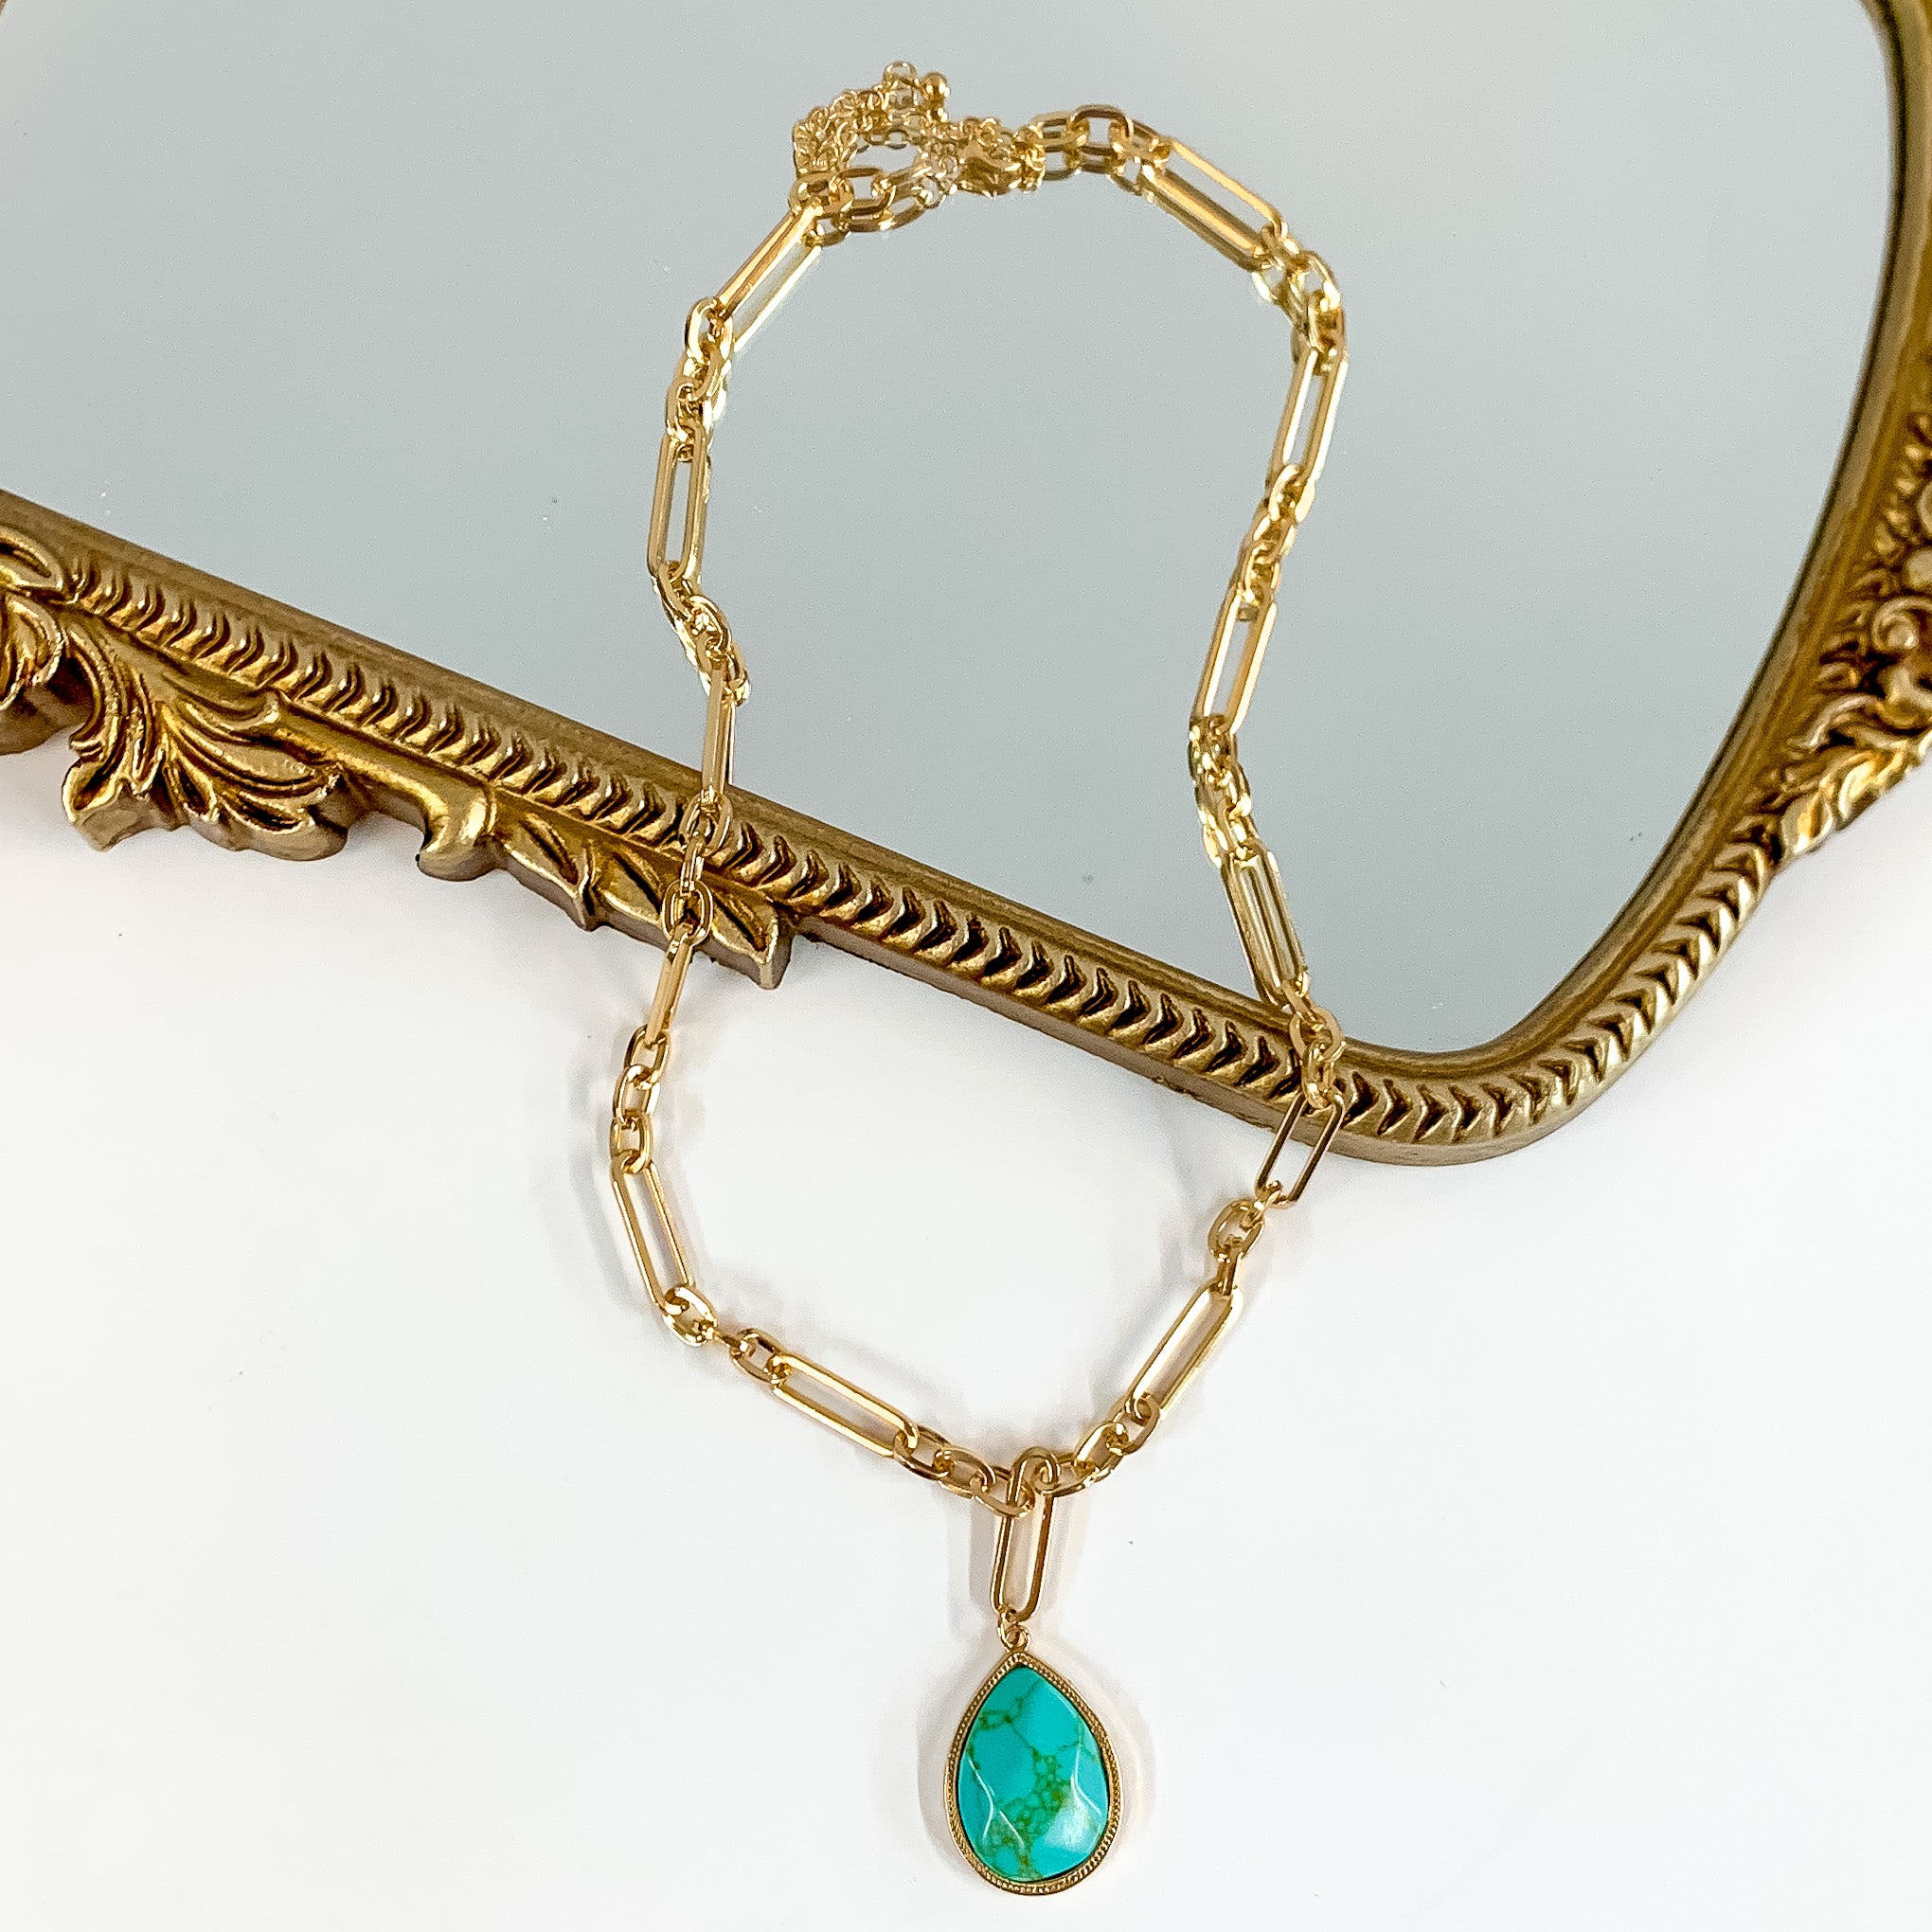 Gold Tone Chain Necklace with Pendant in Turquoise. Pictured on a white background laying halfway on a mirror with a gold trim. 